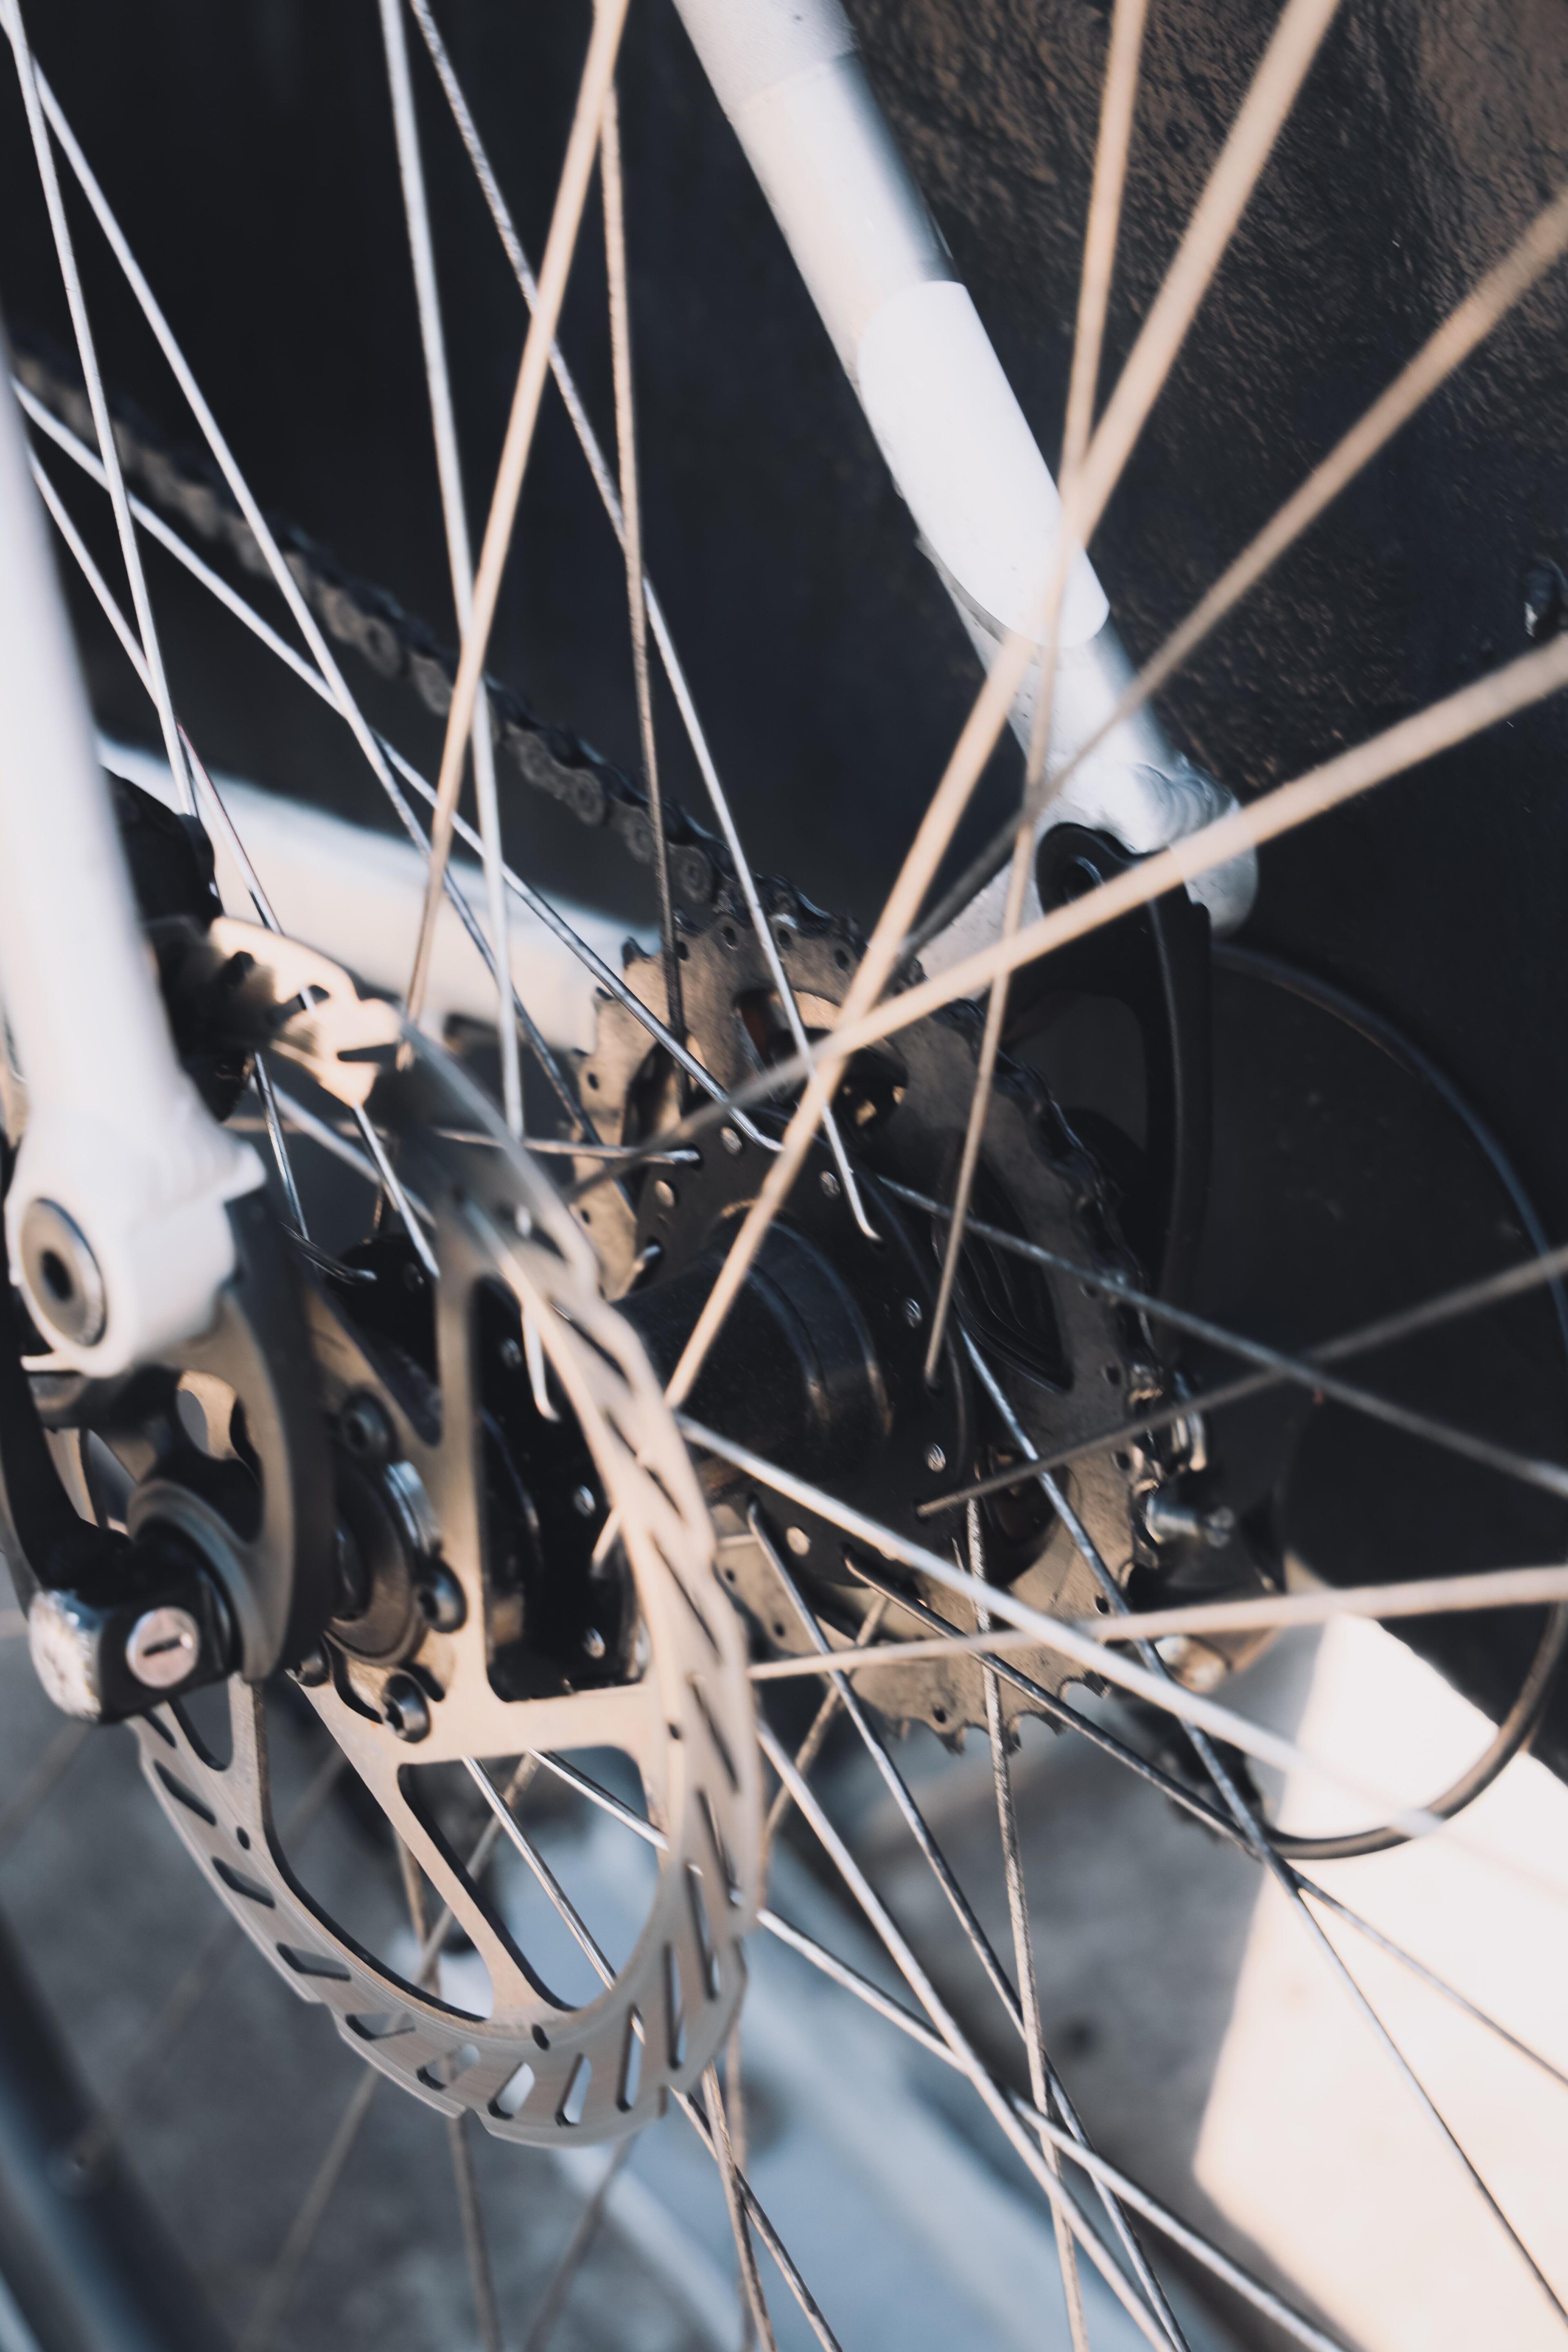 How to Fix or Replace a Broken Spoke